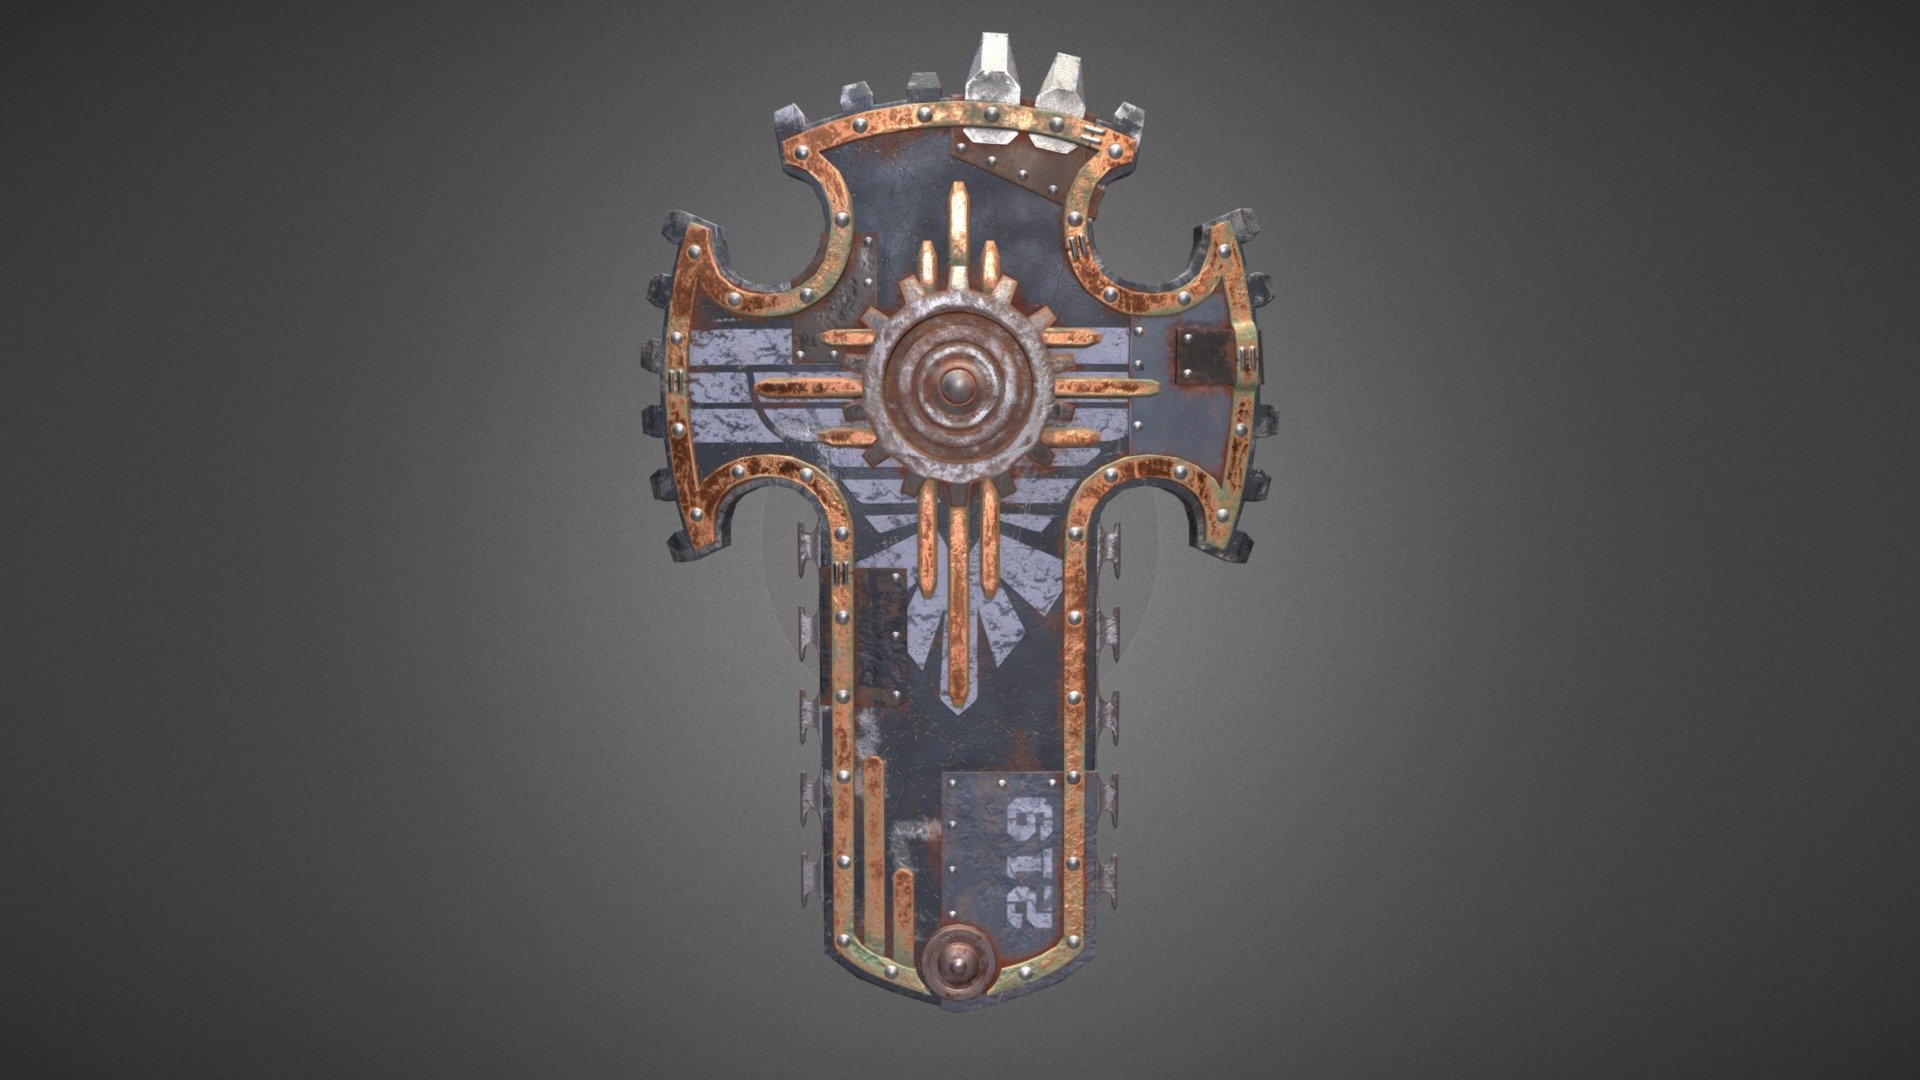 Hi everyone,

I would like to present to you a gear shield, the part of my weapon set, inspired by warhammer 40k Deathwatch Storm Shield.

All done in blender except for textures (Substance Painater).

I hope you like this and want invite you to check out my other models 3d model